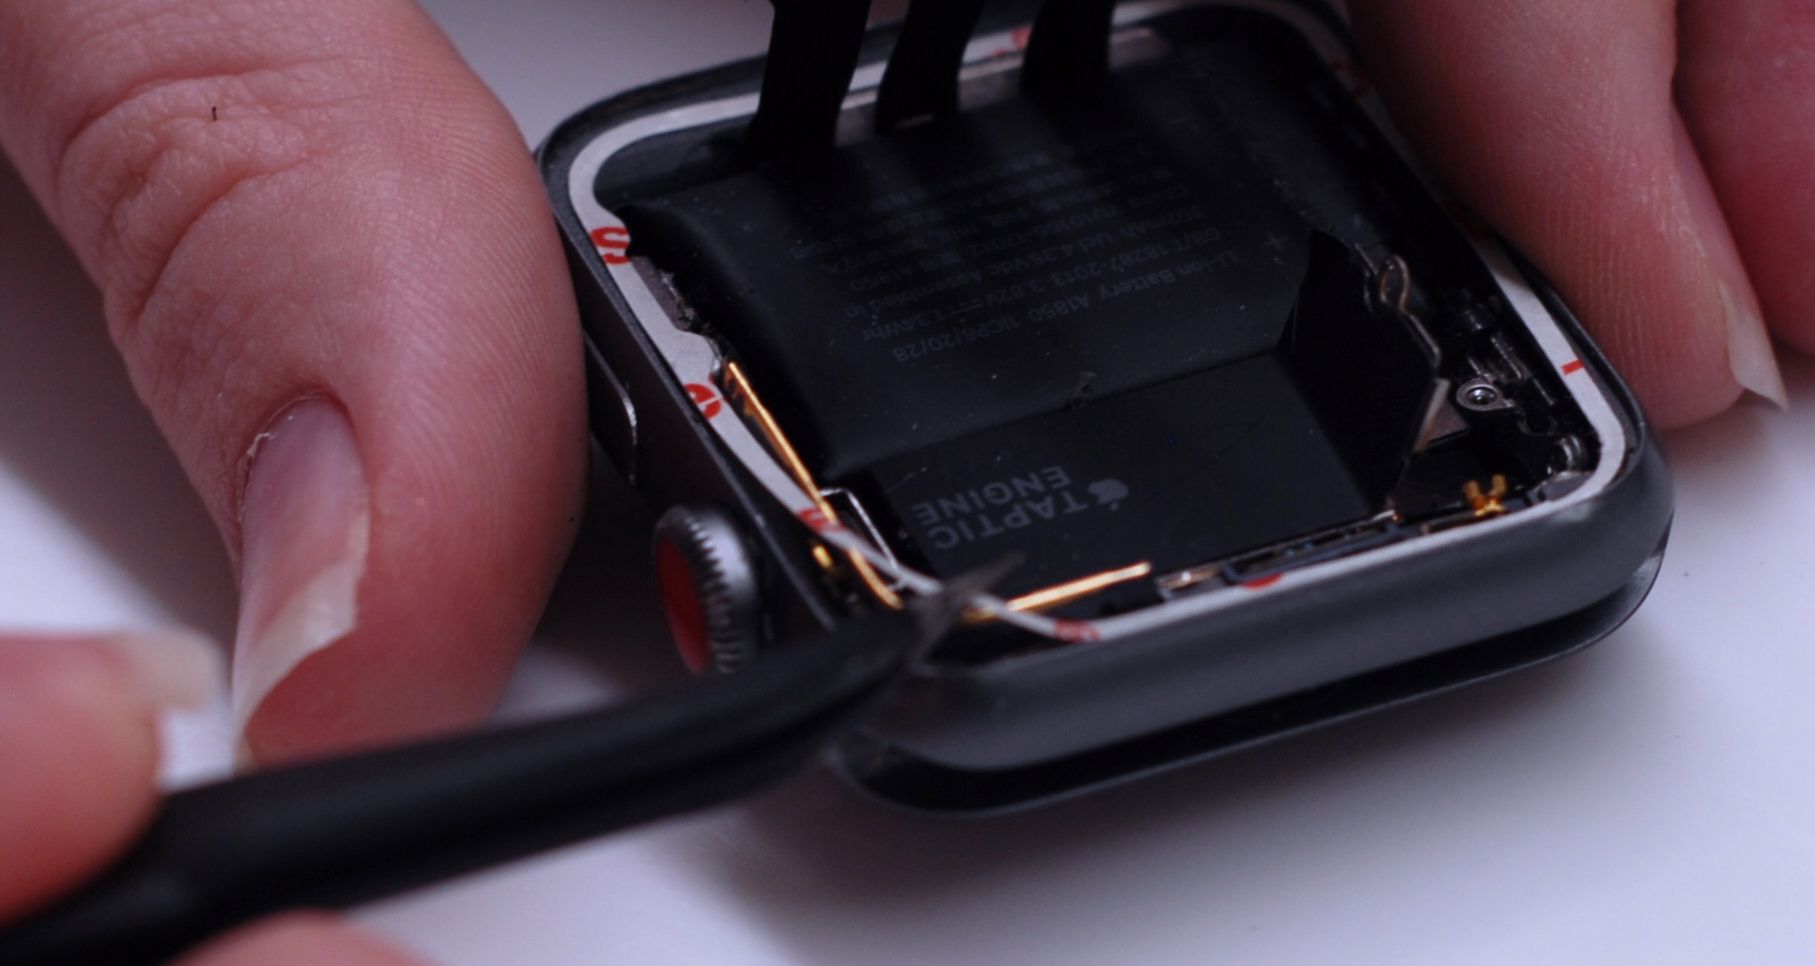 applying adhesive before installing the force touch sensor